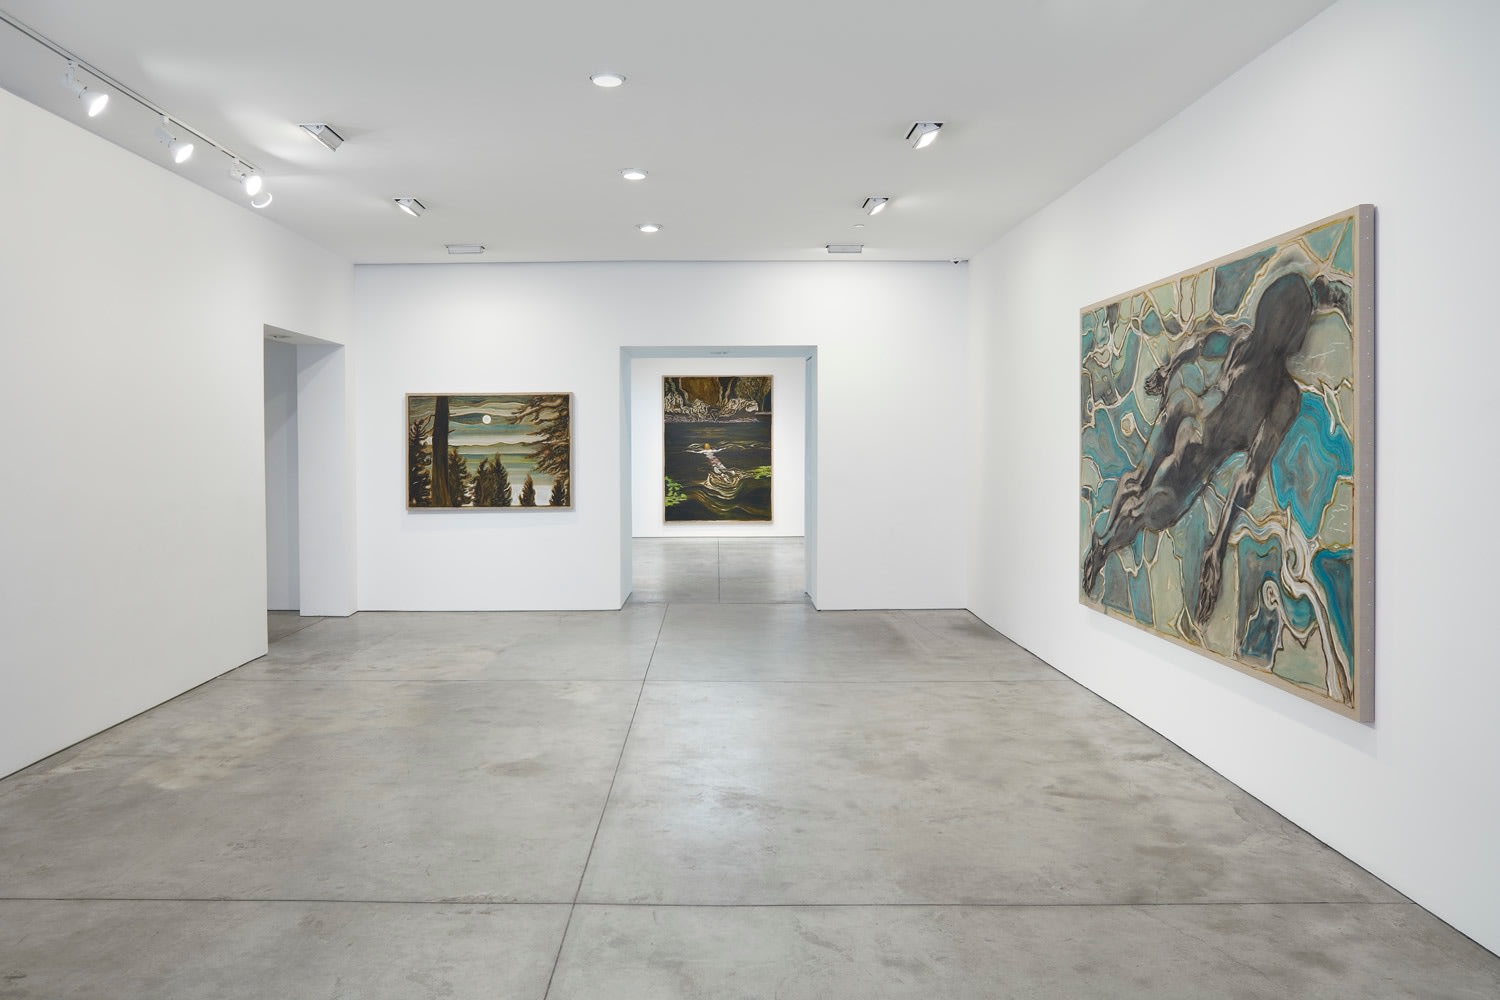 Installation view of Billy Childish exhibition at Lehmann Maupin gallery, New York, 2020, view 1